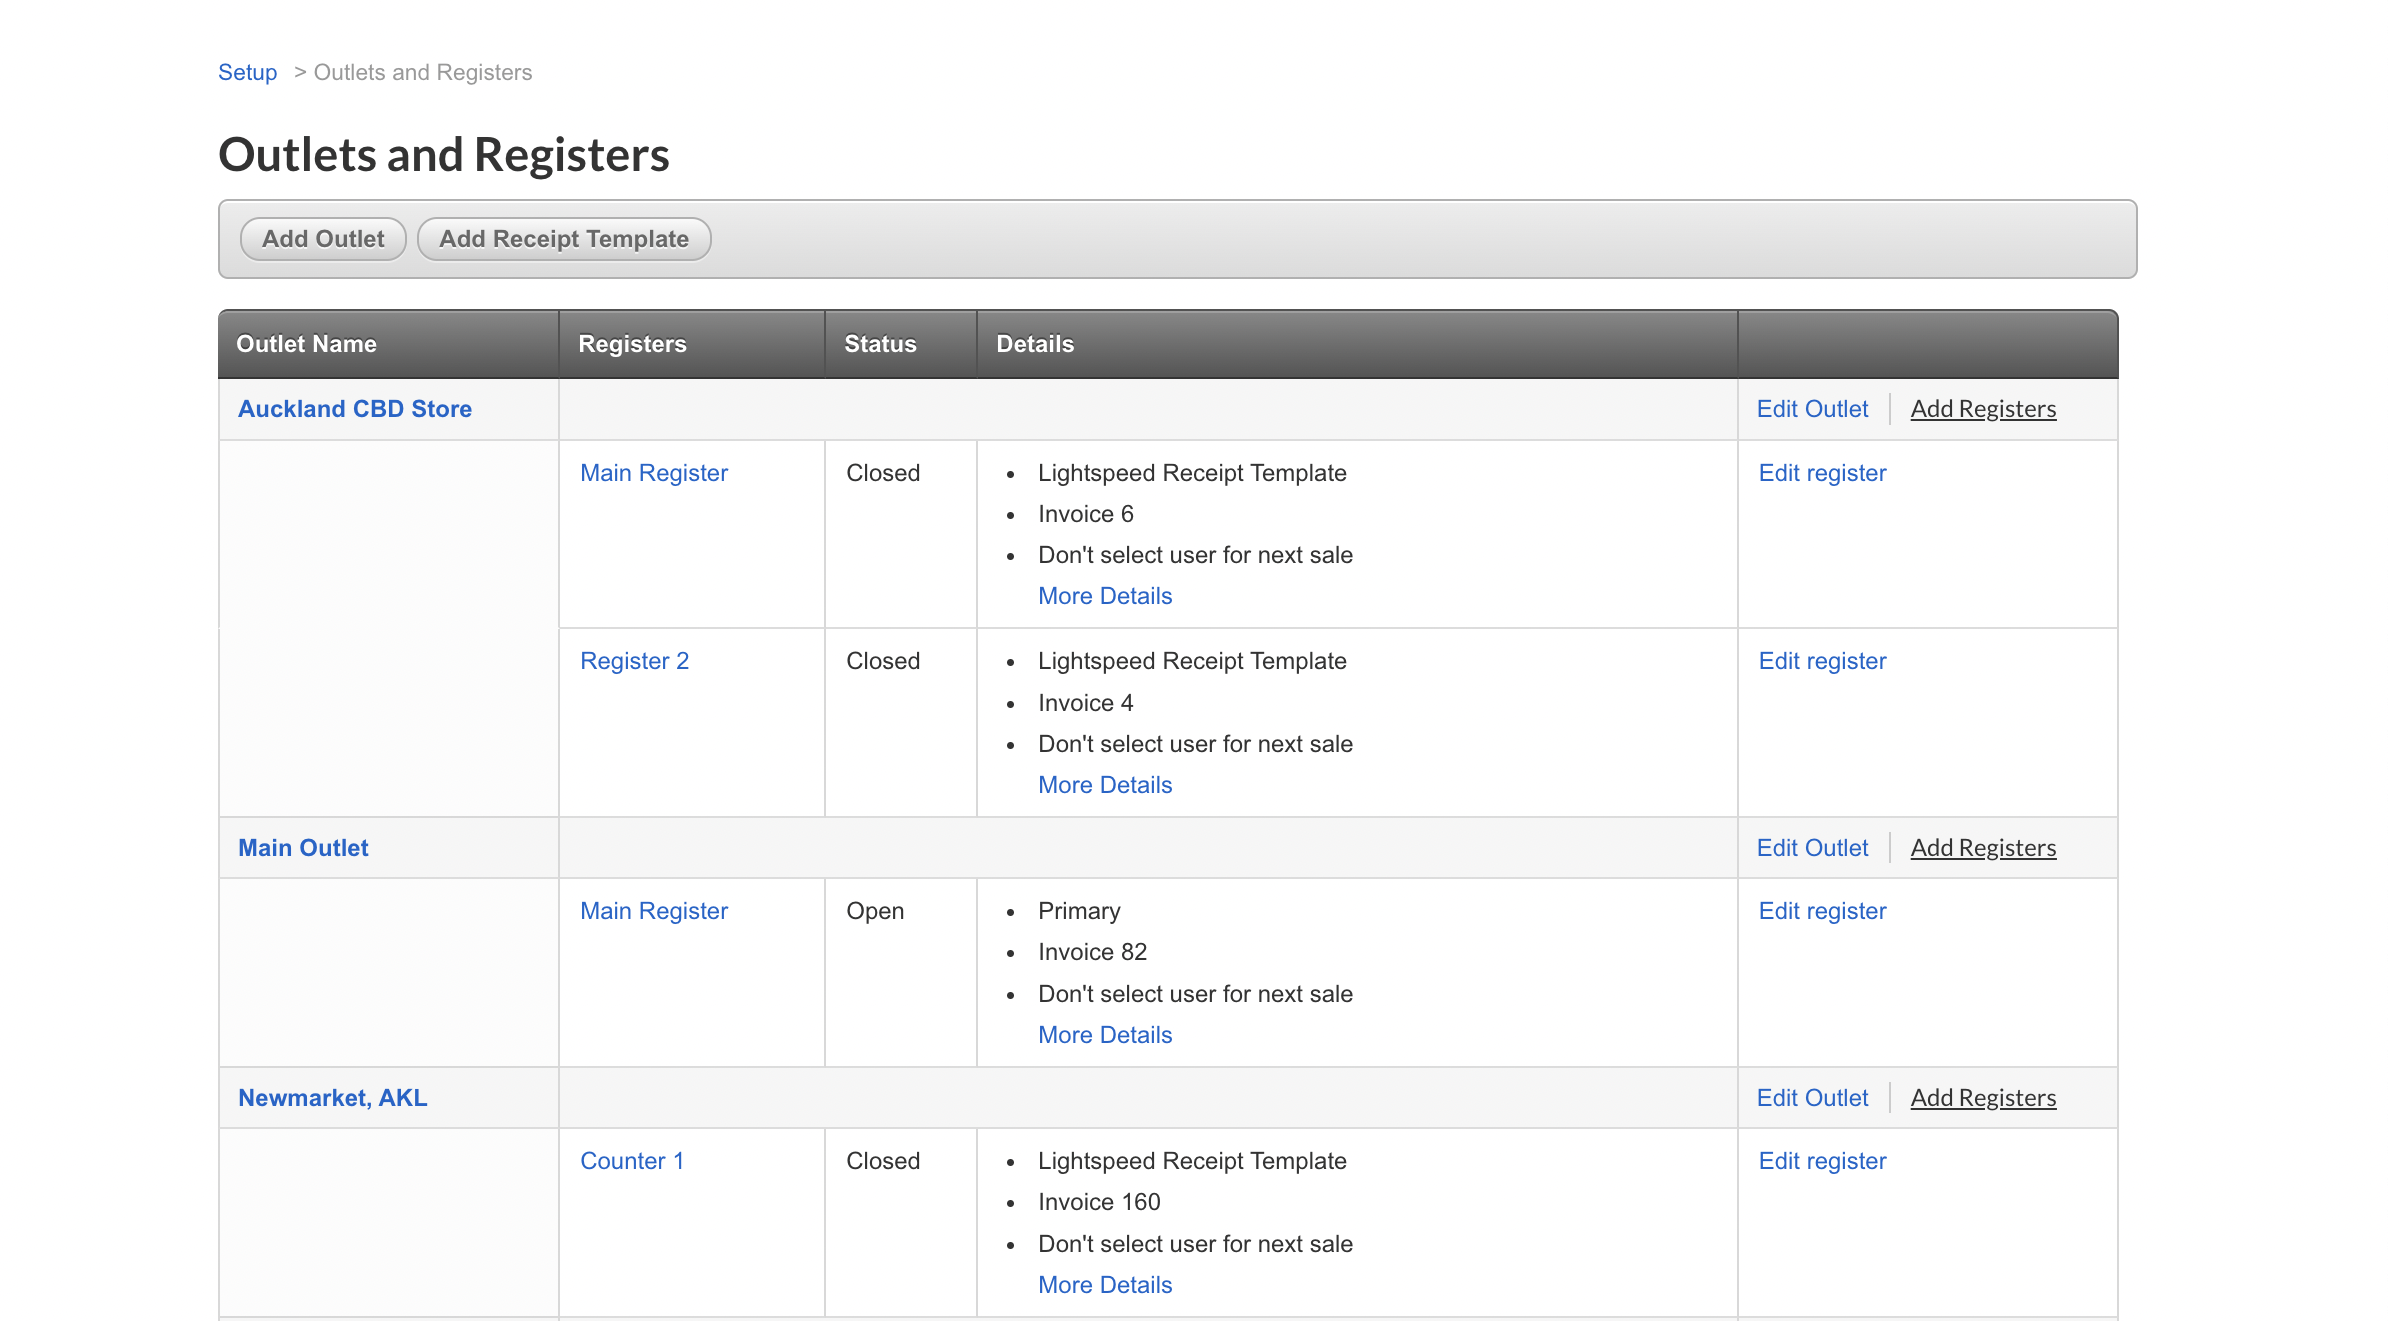 Outlets and Registers page showing a table of example outlet names, registers, status, and details.